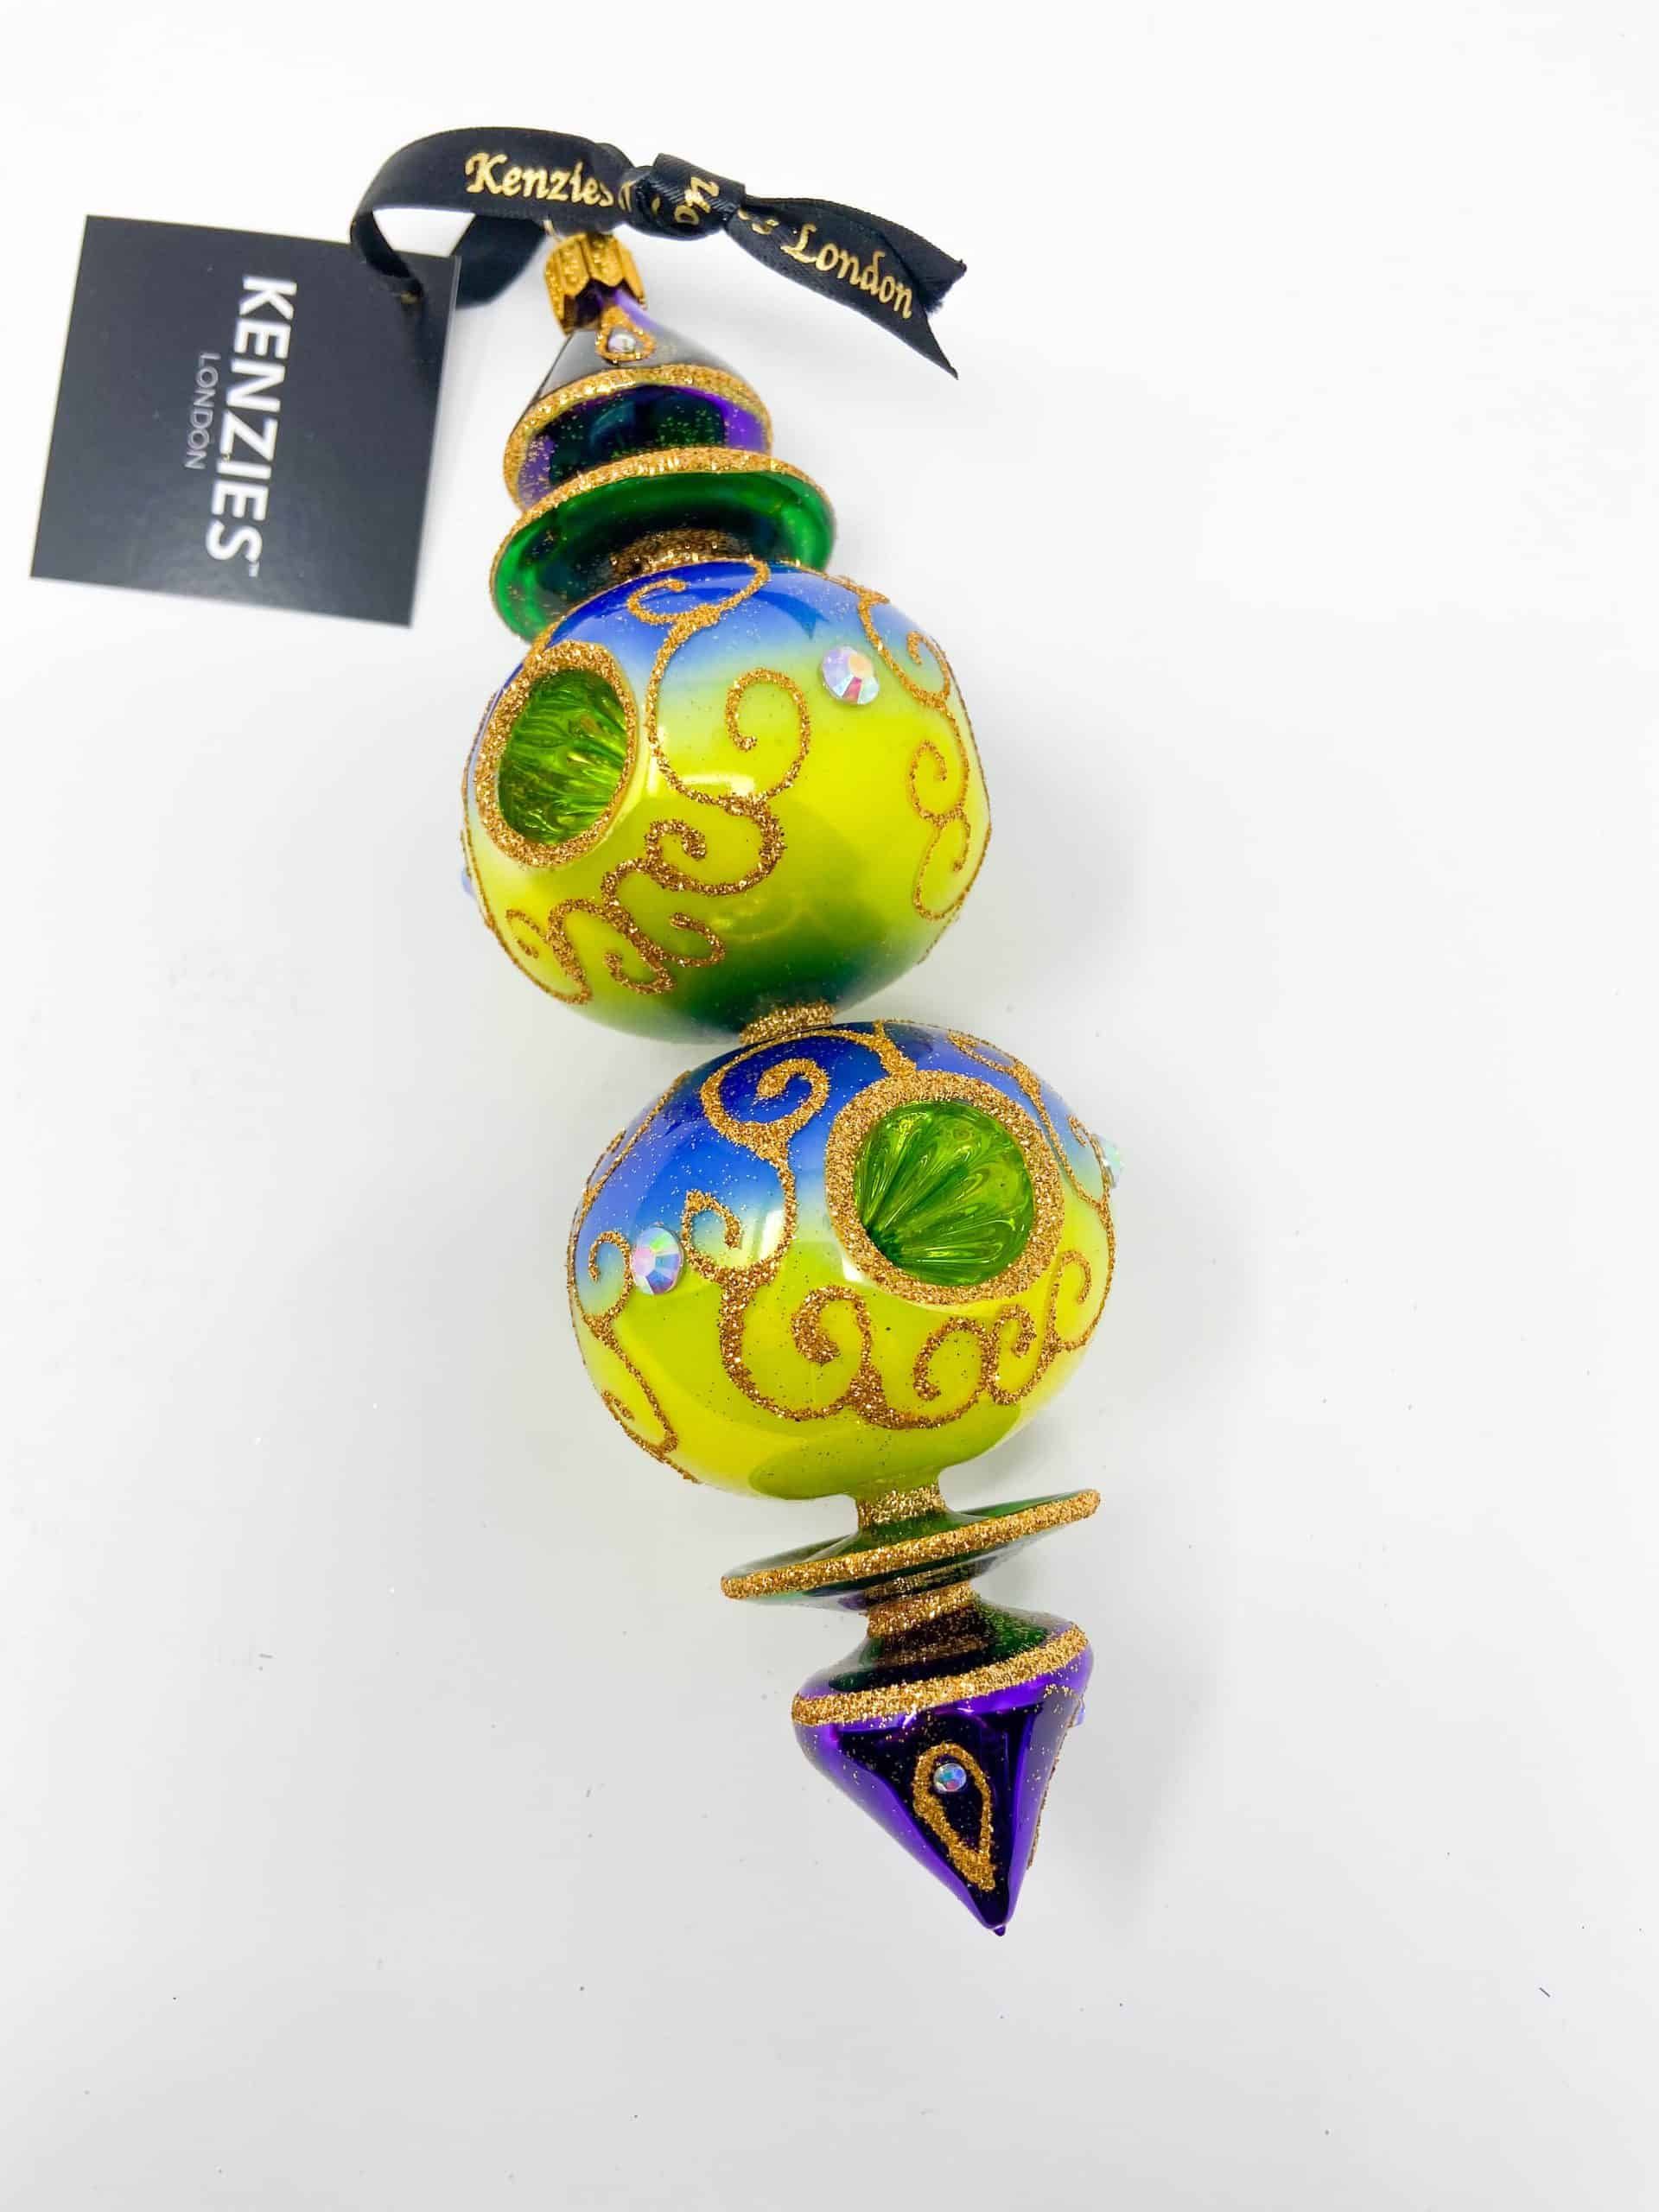 Las Vegas collection ornament featuring spinning reflector and rainbow neon colors reflecting the Las Vegas Strip. Inspired by casinos. Christmas ornament made from hand blown polish glass.